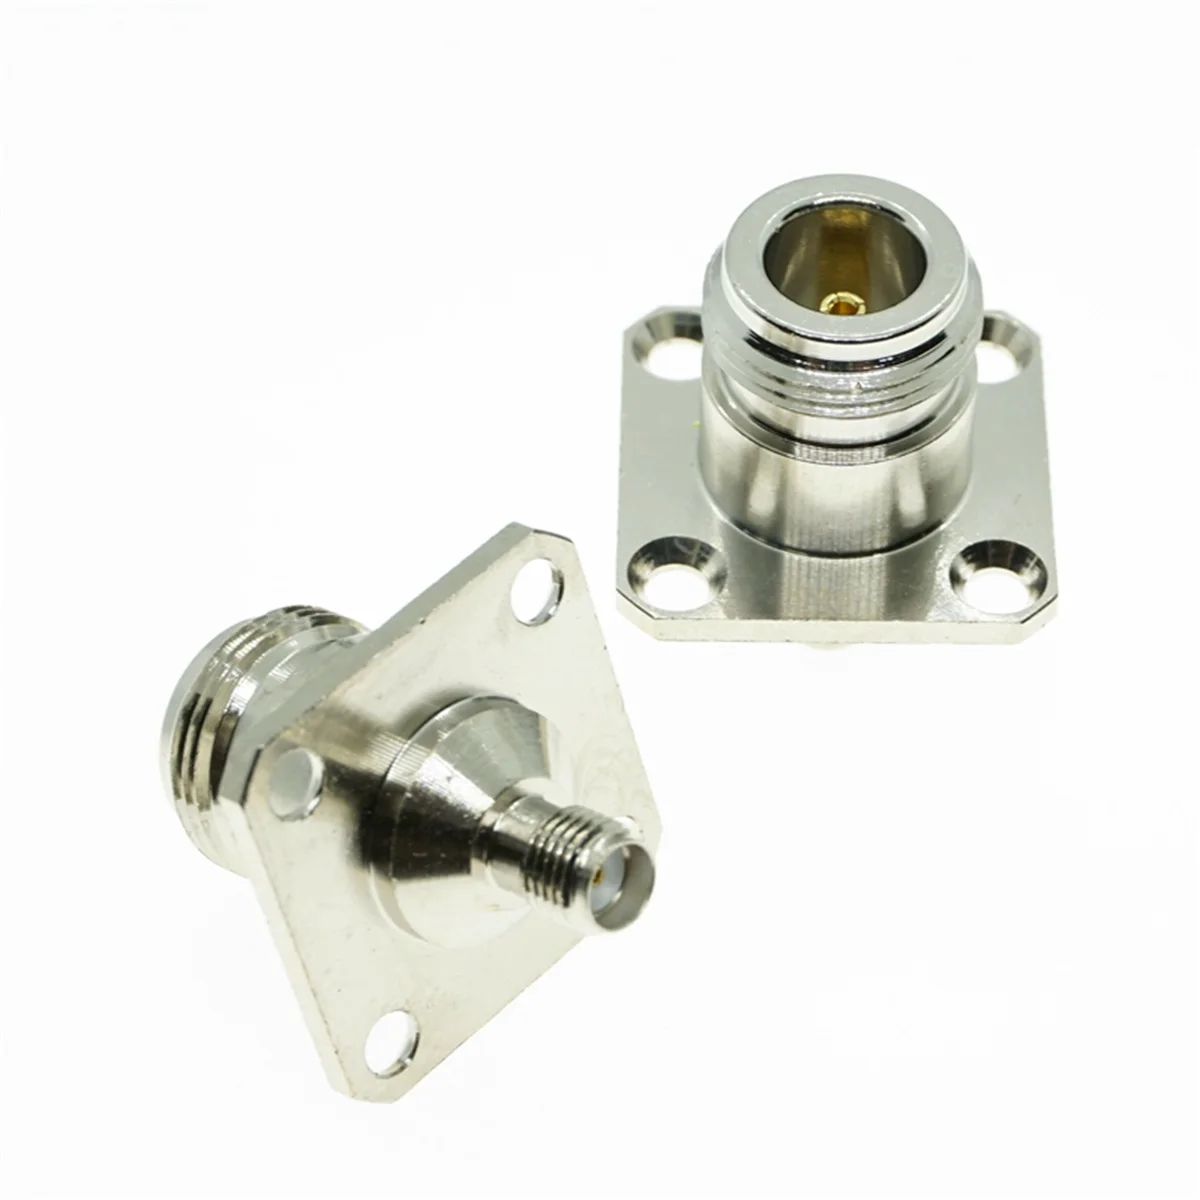 

1PCS New N female To SMA female Flange 4 Hole Panel Mount Connector RF Coaxial Adapter nickle